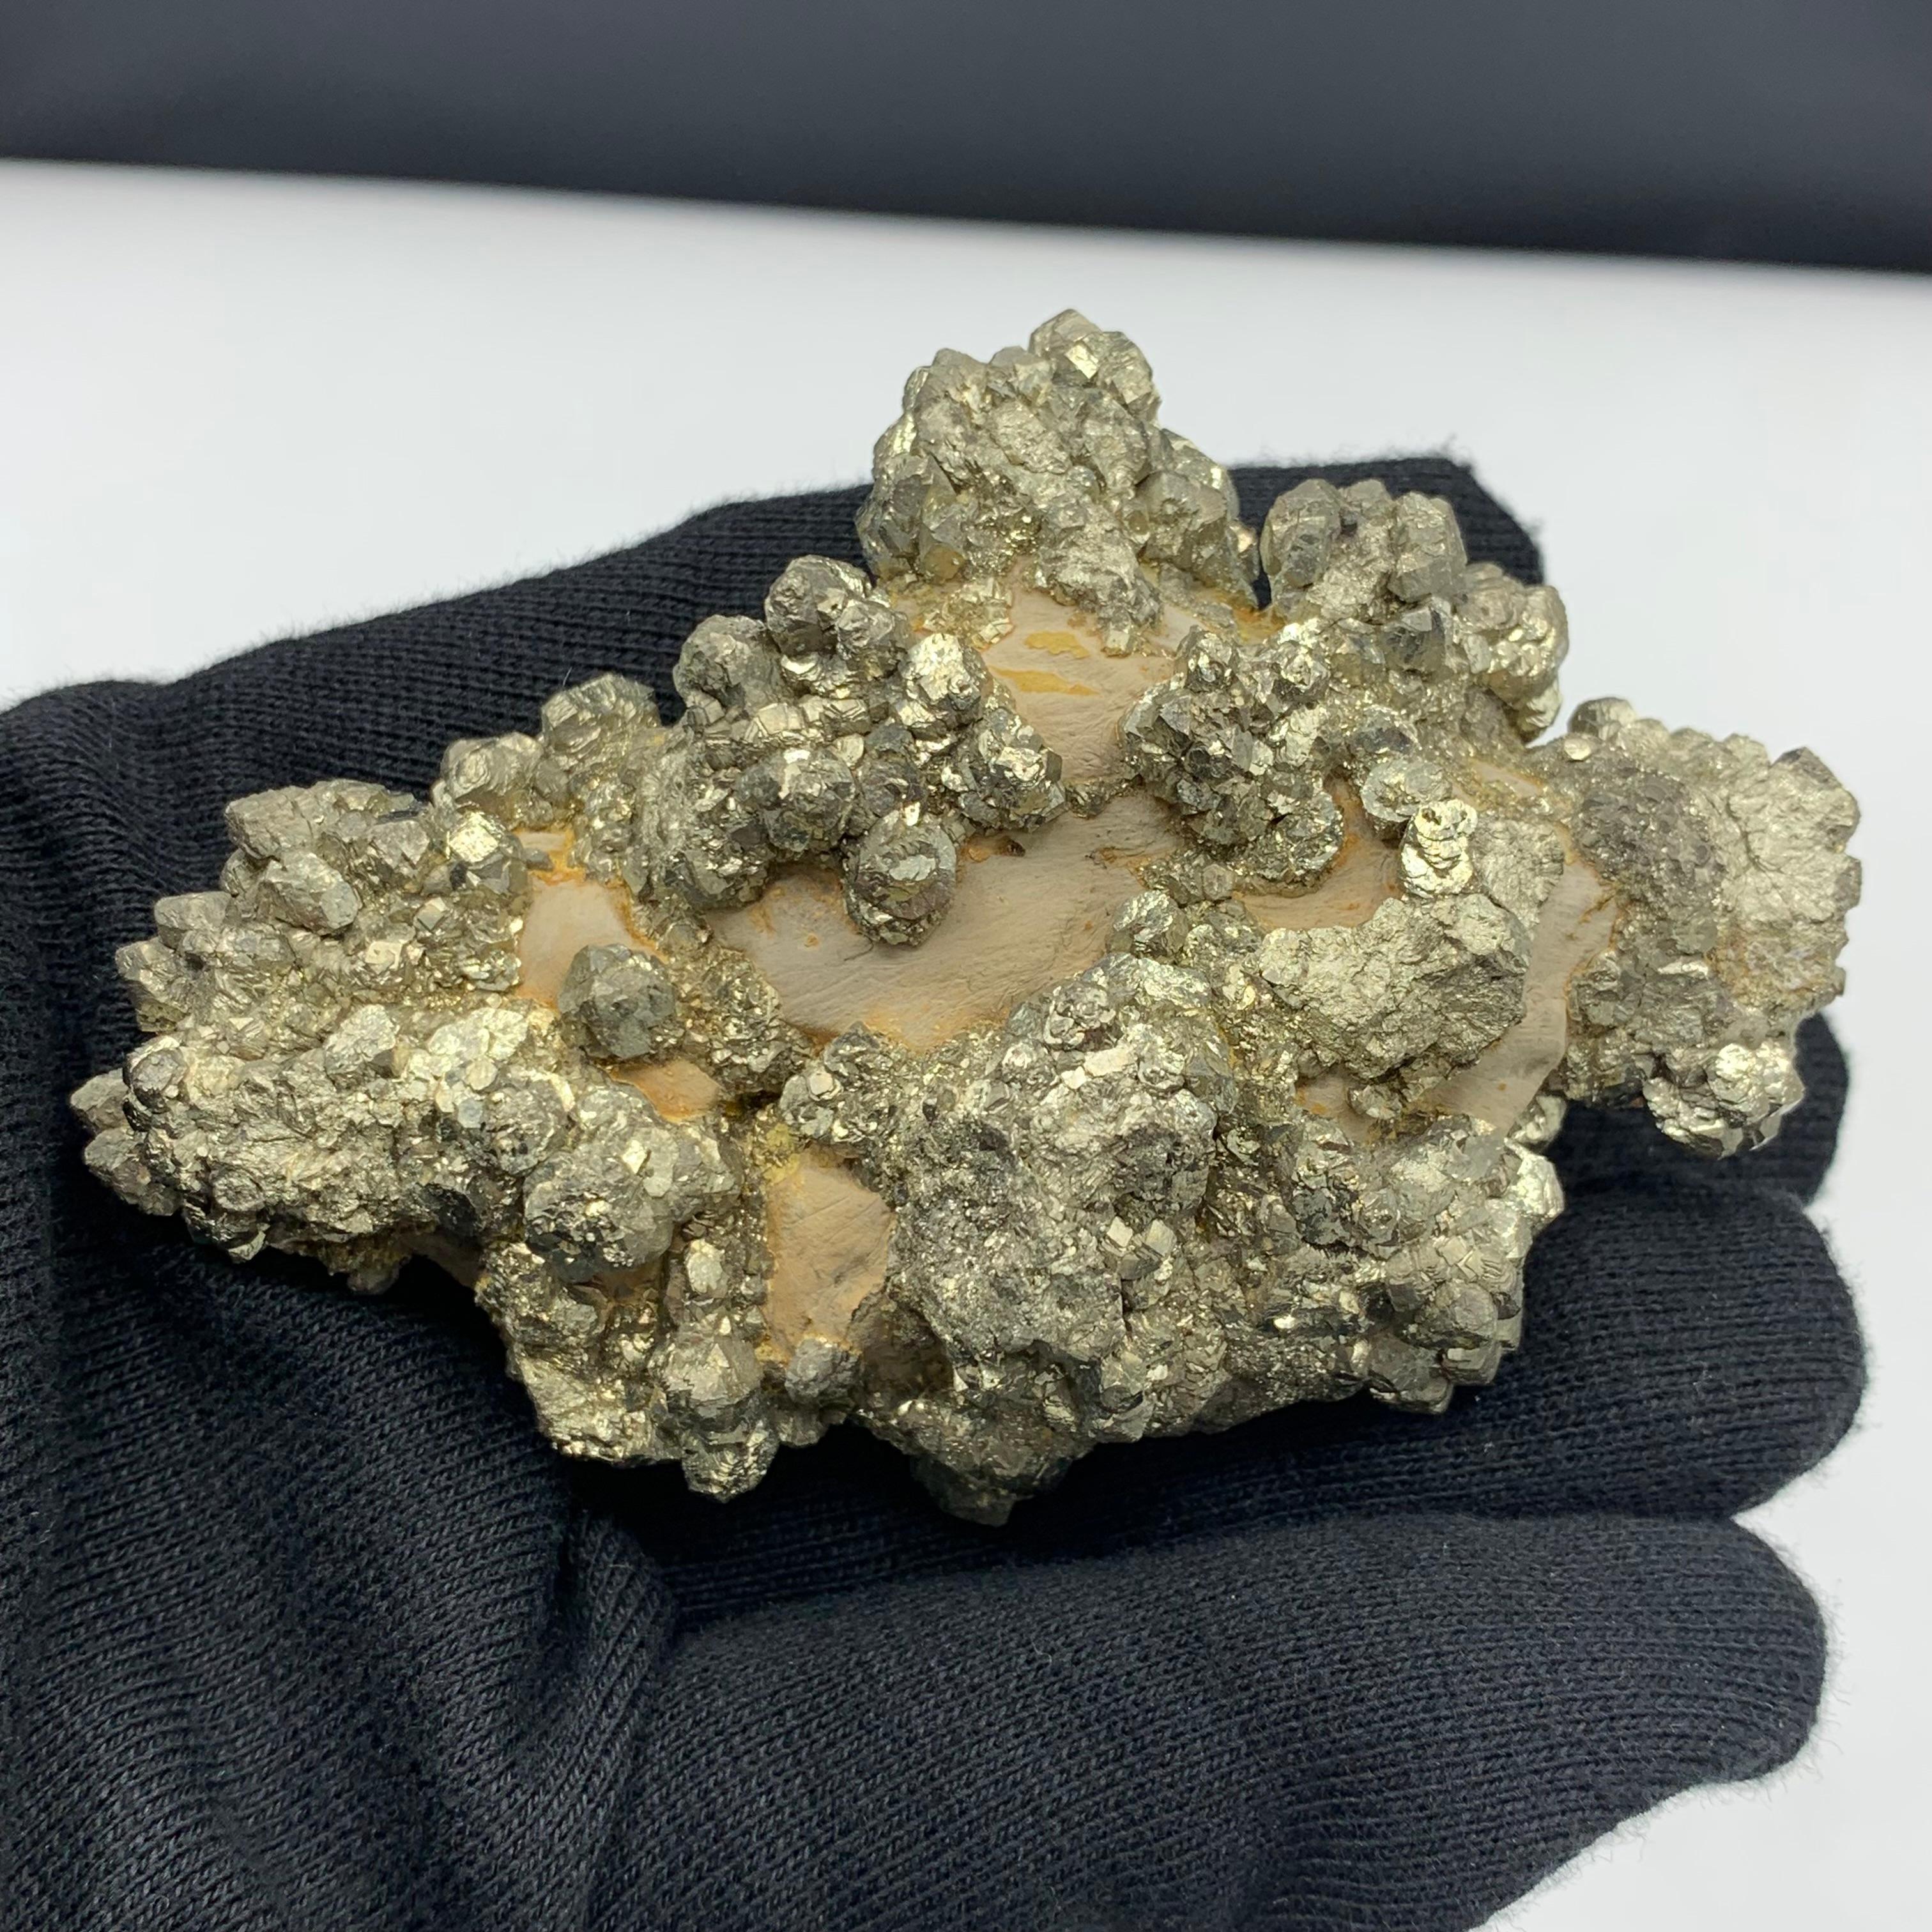 Other 320.04 Gram Beautiful Pyrite Specimen From Pakistan  For Sale